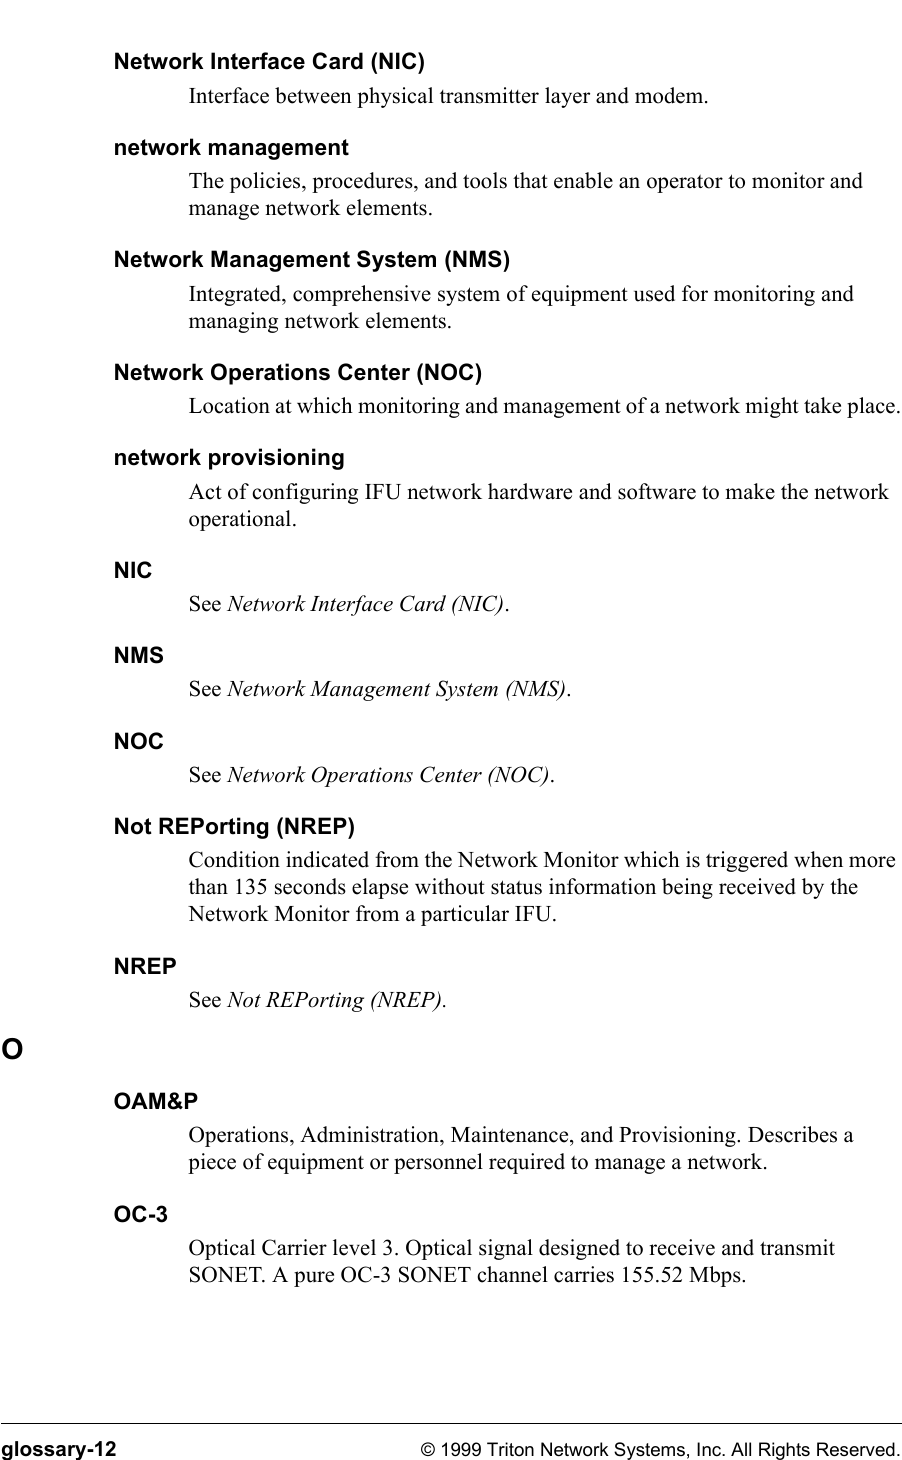 glossary-12 © 1999 Triton Network Systems, Inc. All Rights Reserved.Network Interface Card (NIC)Interface between physical transmitter layer and modem.network managementThe policies, procedures, and tools that enable an operator to monitor and manage network elements.Network Management System (NMS)Integrated, comprehensive system of equipment used for monitoring and managing network elements.Network Operations Center (NOC)Location at which monitoring and management of a network might take place.network provisioningAct of configuring IFU network hardware and software to make the network operational.NICSee Network Interface Card (NIC). NMSSee Network Management System (NMS). NOCSee Network Operations Center (NOC).Not REPorting (NREP)Condition indicated from the Network Monitor which is triggered when more than 135 seconds elapse without status information being received by the Network Monitor from a particular IFU.NREPSee Not REPorting (NREP).OOAM&amp;POperations, Administration, Maintenance, and Provisioning. Describes a piece of equipment or personnel required to manage a network.OC-3Optical Carrier level 3. Optical signal designed to receive and transmit SONET. A pure OC-3 SONET channel carries 155.52 Mbps.